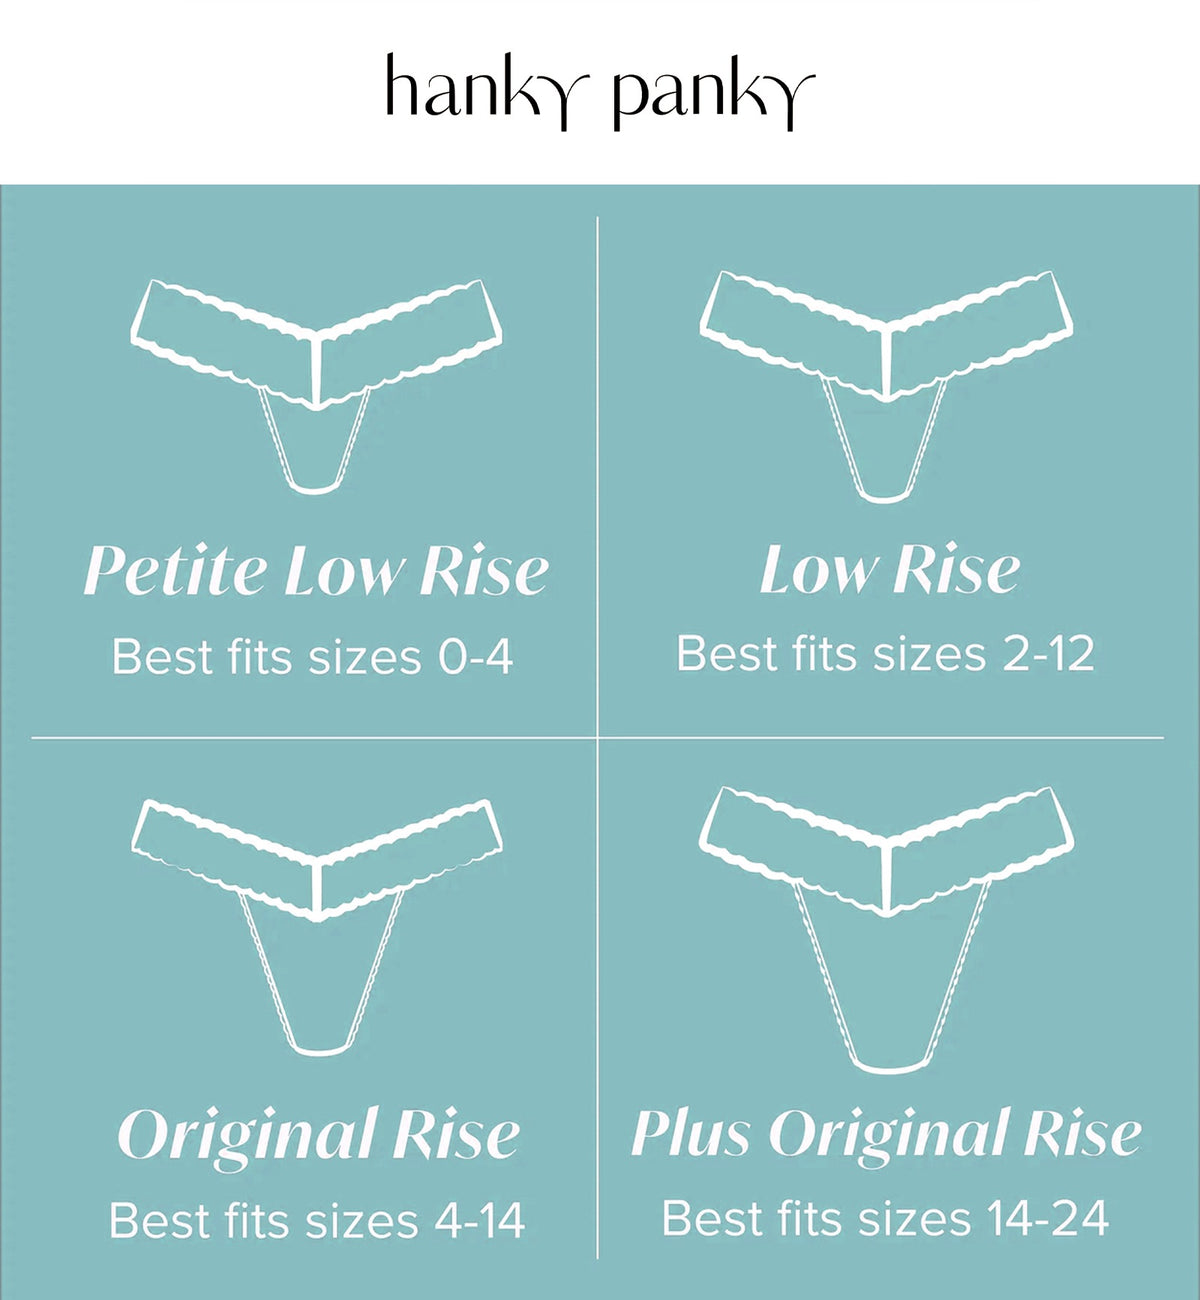 Hanky Panky 5-PACK Signature Lace Original Rise Thong (48115PK),Still Blooming - Pink/Orange Sparkle/Limoncello/Agave Green/Plum,One Size